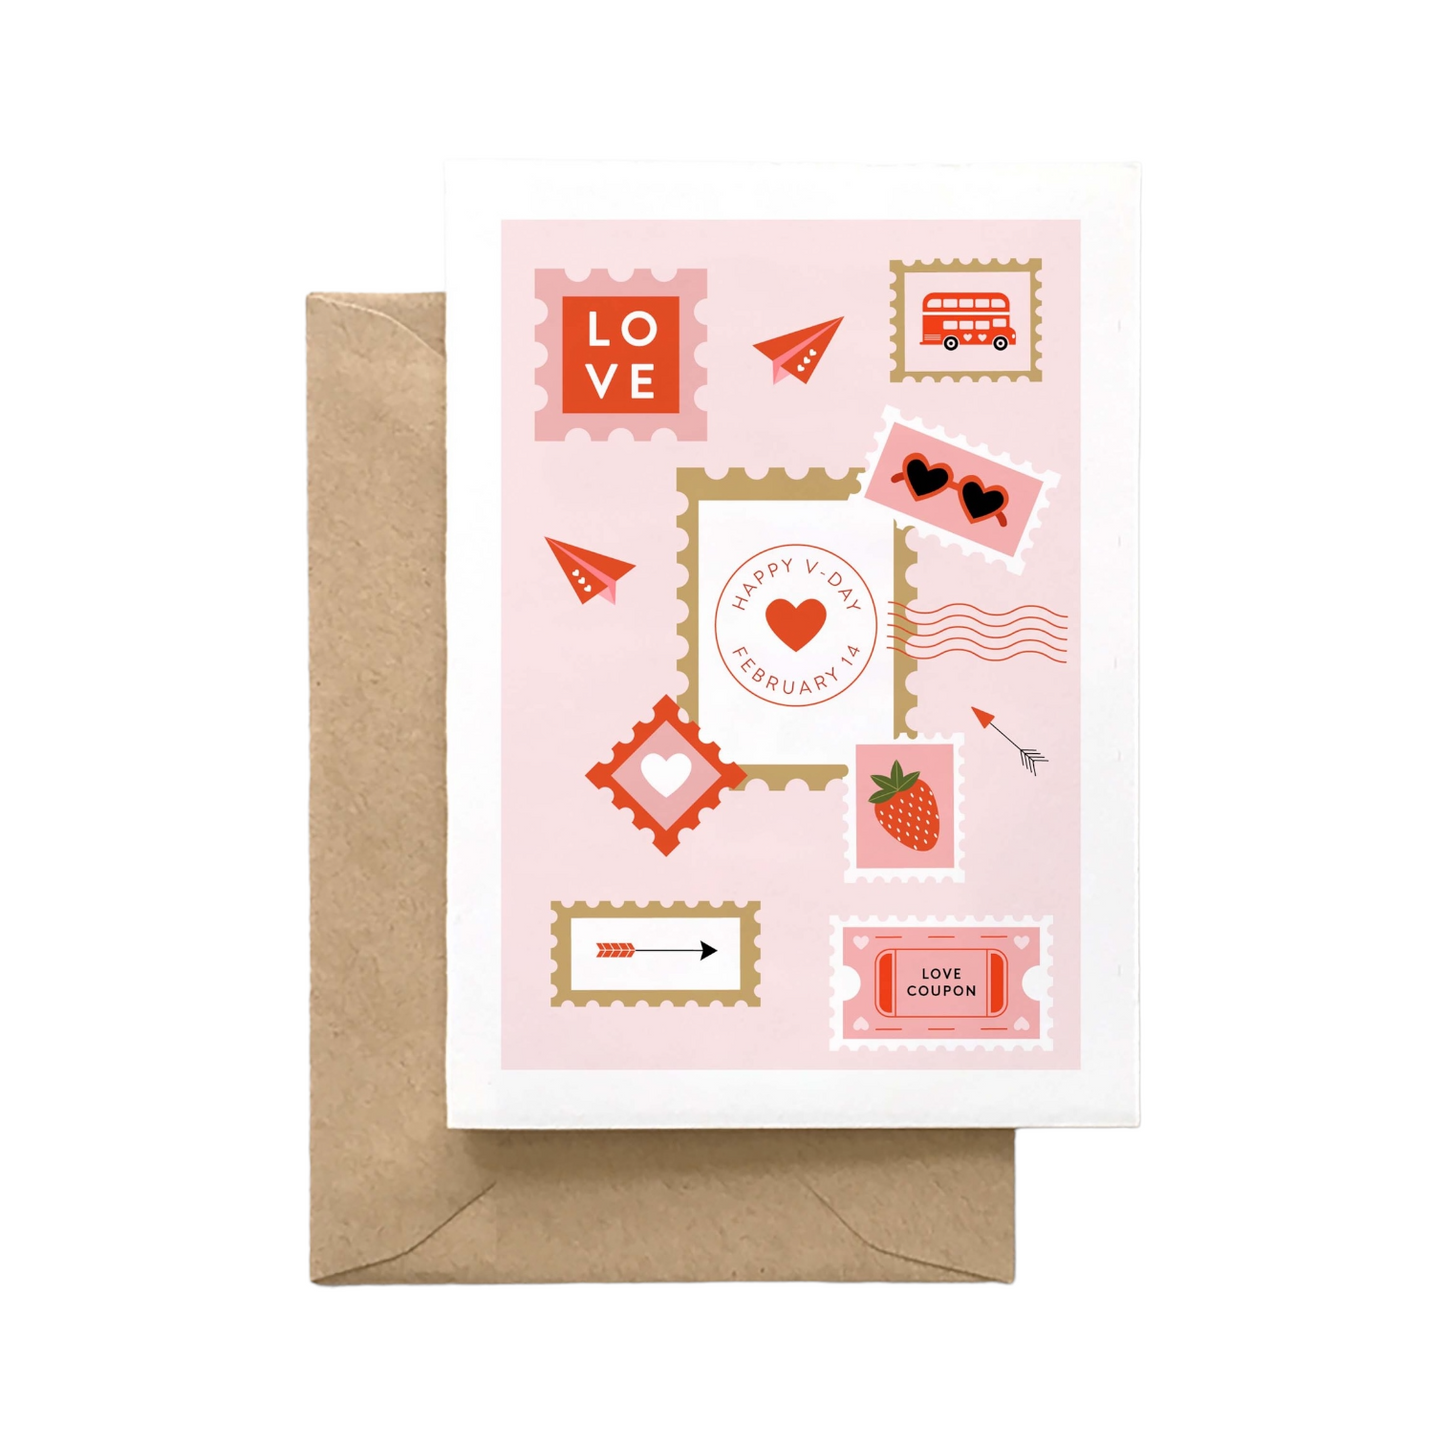 Valentine's Day Mail Card by Spaghetti & Meatballs